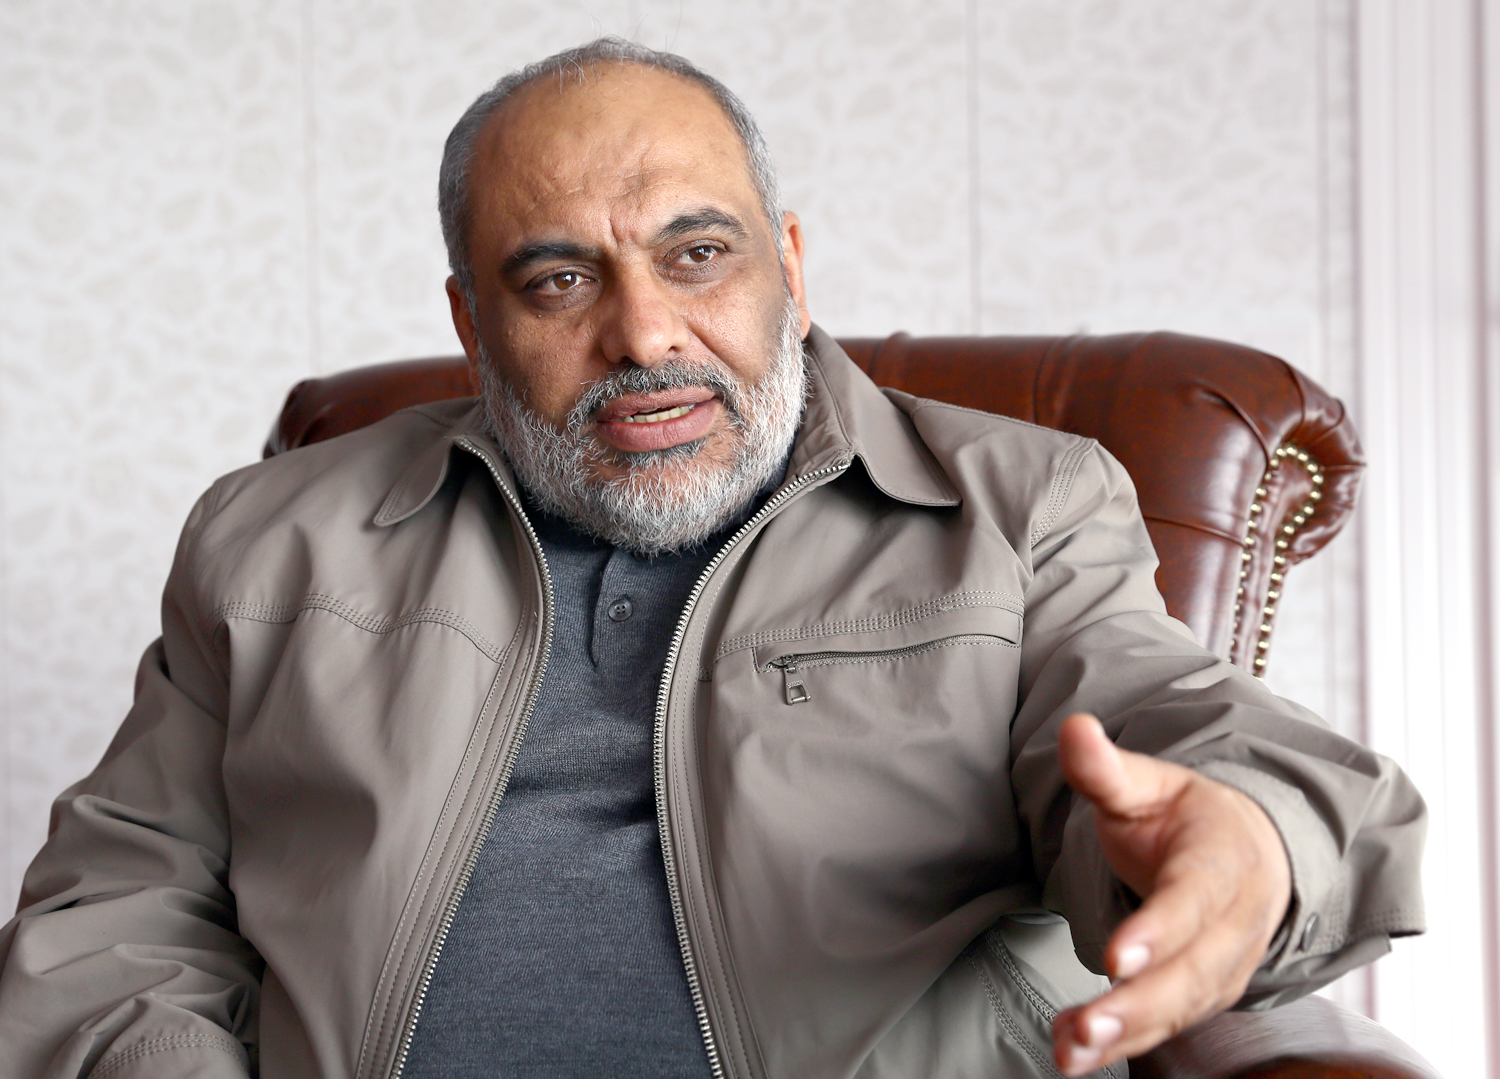 Head of Turkey's Foundation for Human Rights and Freedoms and Humanitarian Relief (IHH) Fehmi Bulent Yildirim